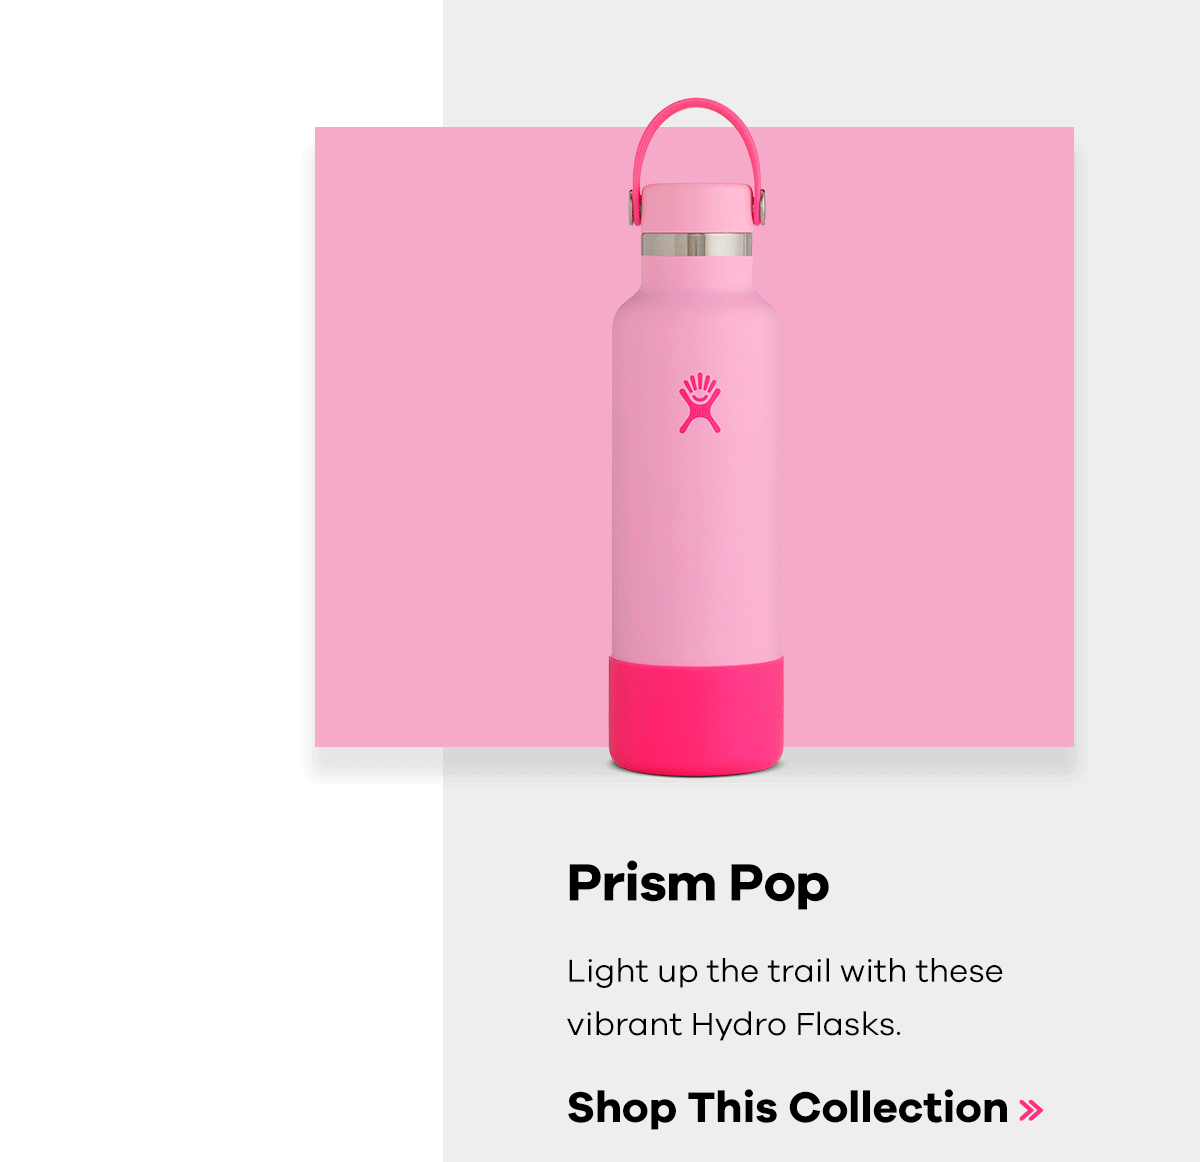 Prism Pop - Light up the trail with these vibrant Hydro Flasks. | Shop This Collection >>